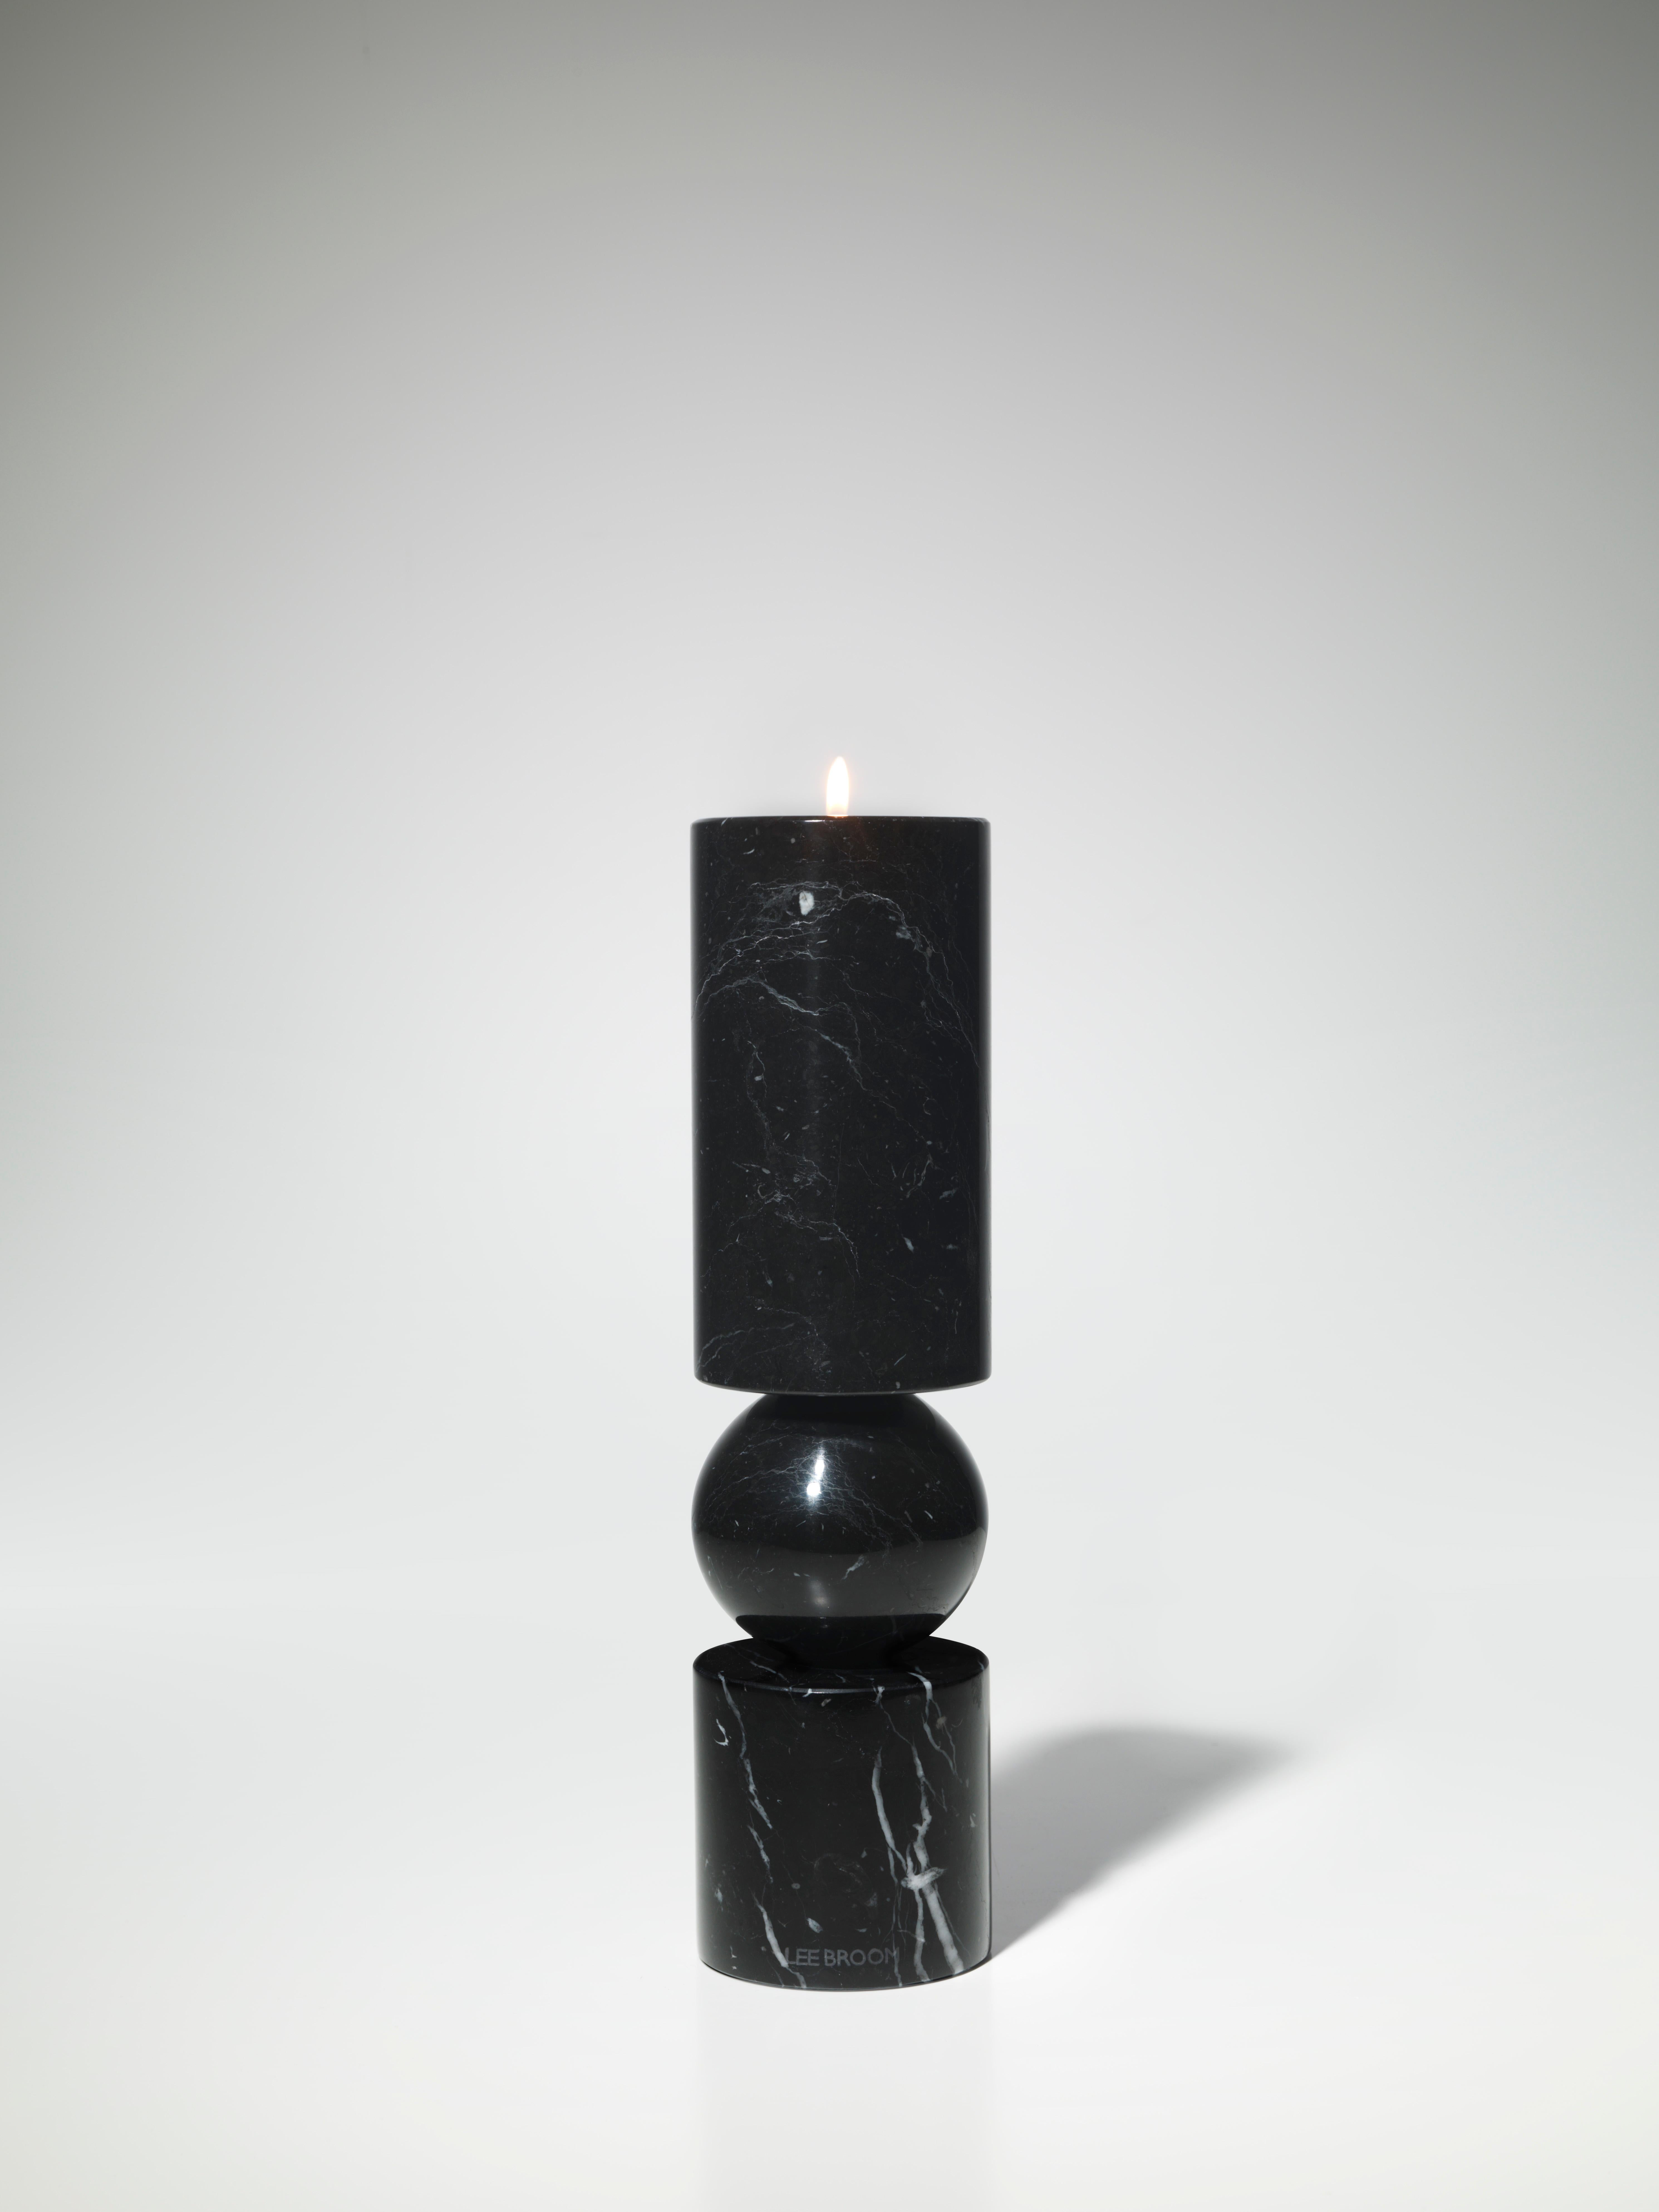 A play on the concept of pivots and supports, Fulcrum is a sculptural and monolithic candlestick whose cylindrical stem appears to balance on a central sphere. 

Includes large clear cup tealight candle.